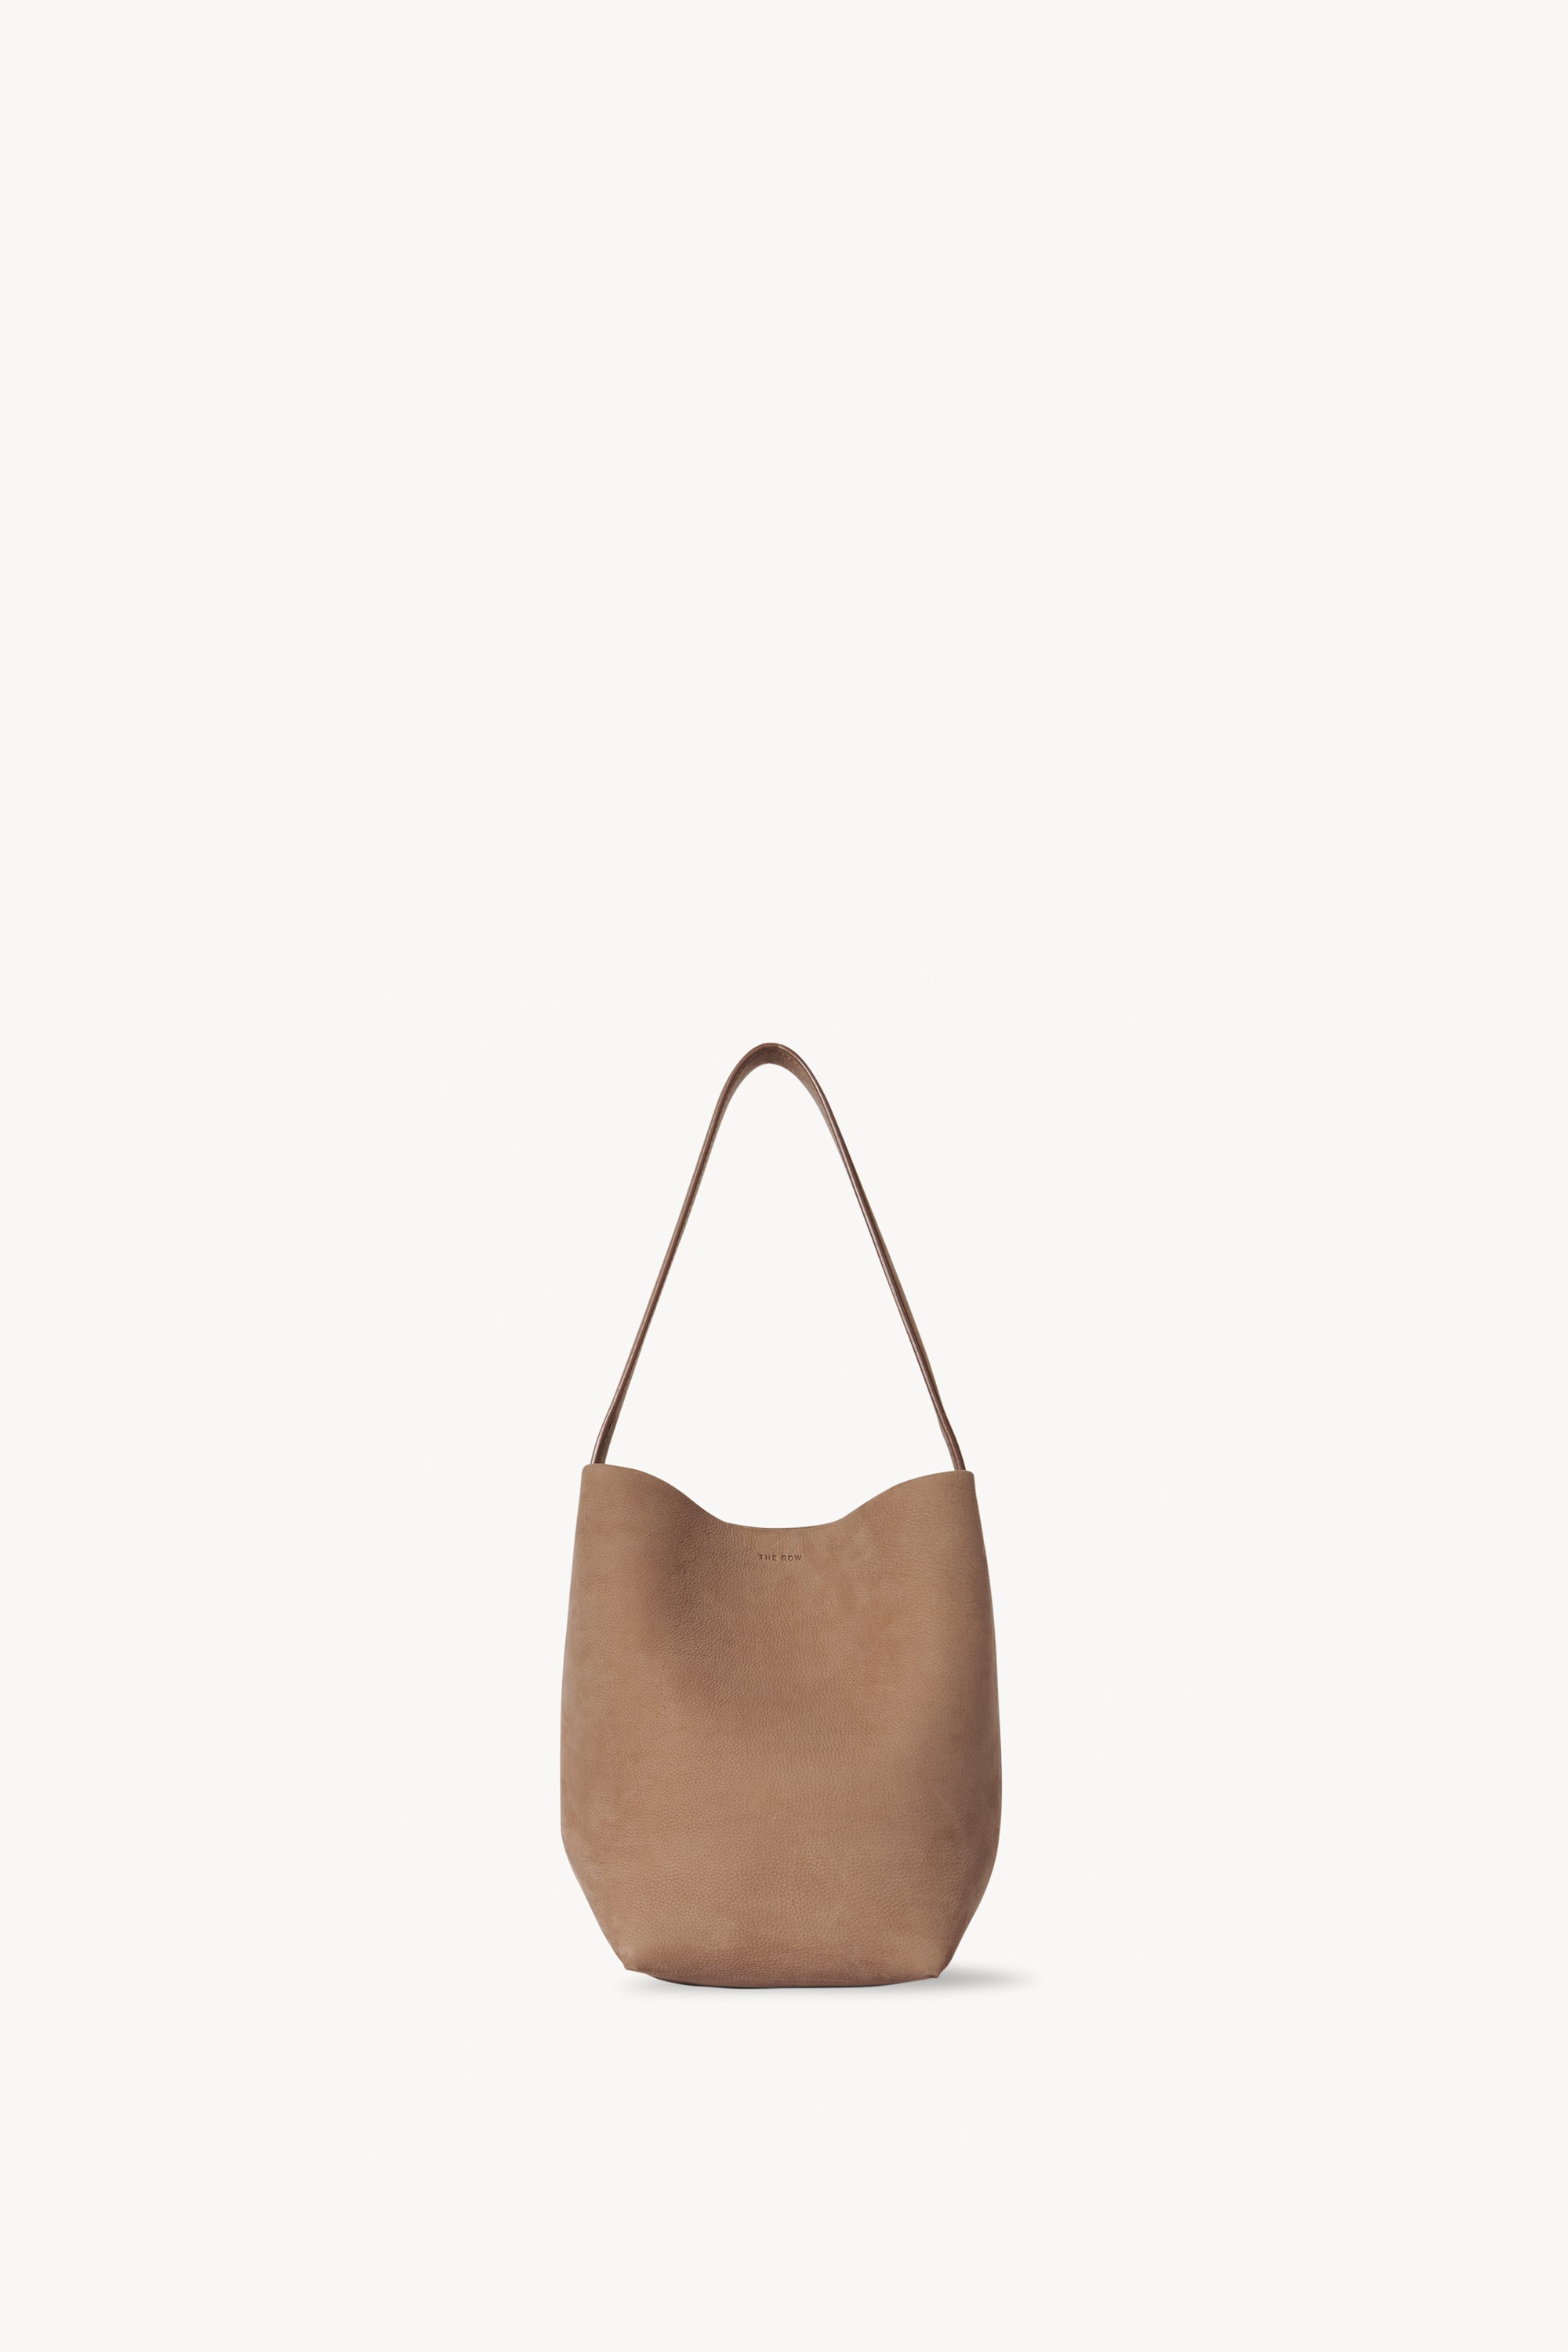 The Row Small Leather N/S Park Tote Bag